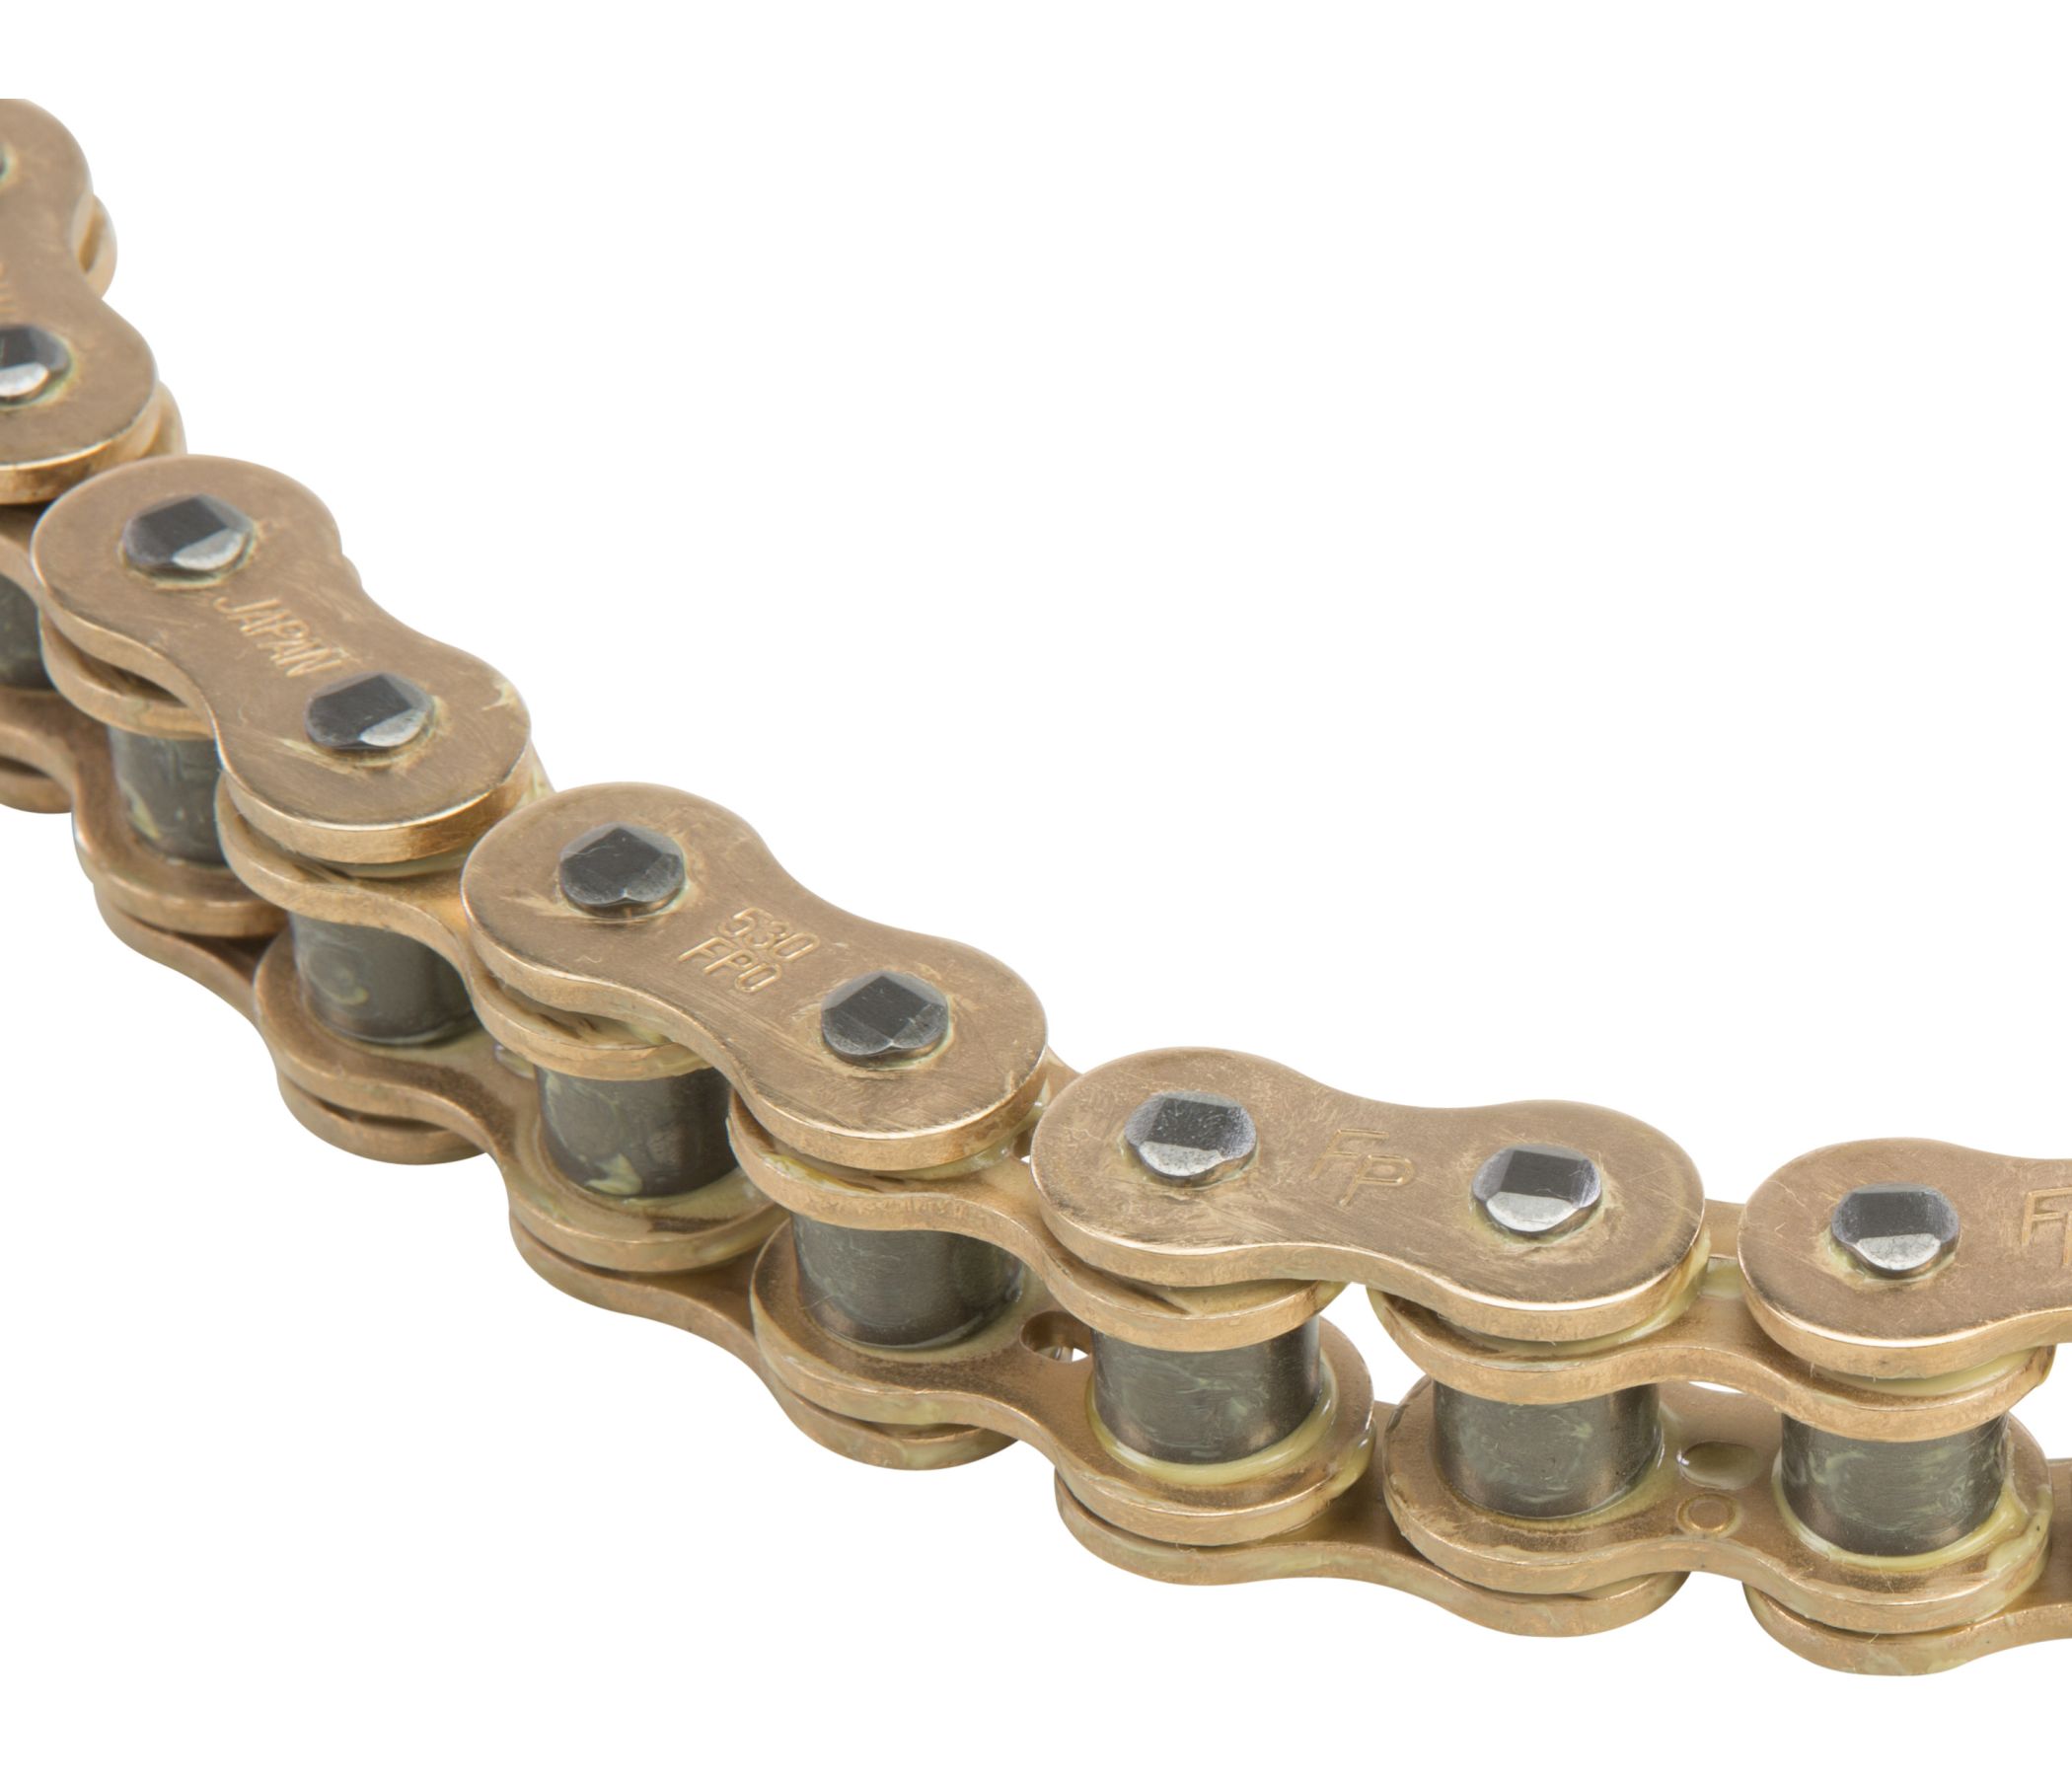 Lockitt Mobile Security & Accessories FirePower FPO 530 ORing Chain